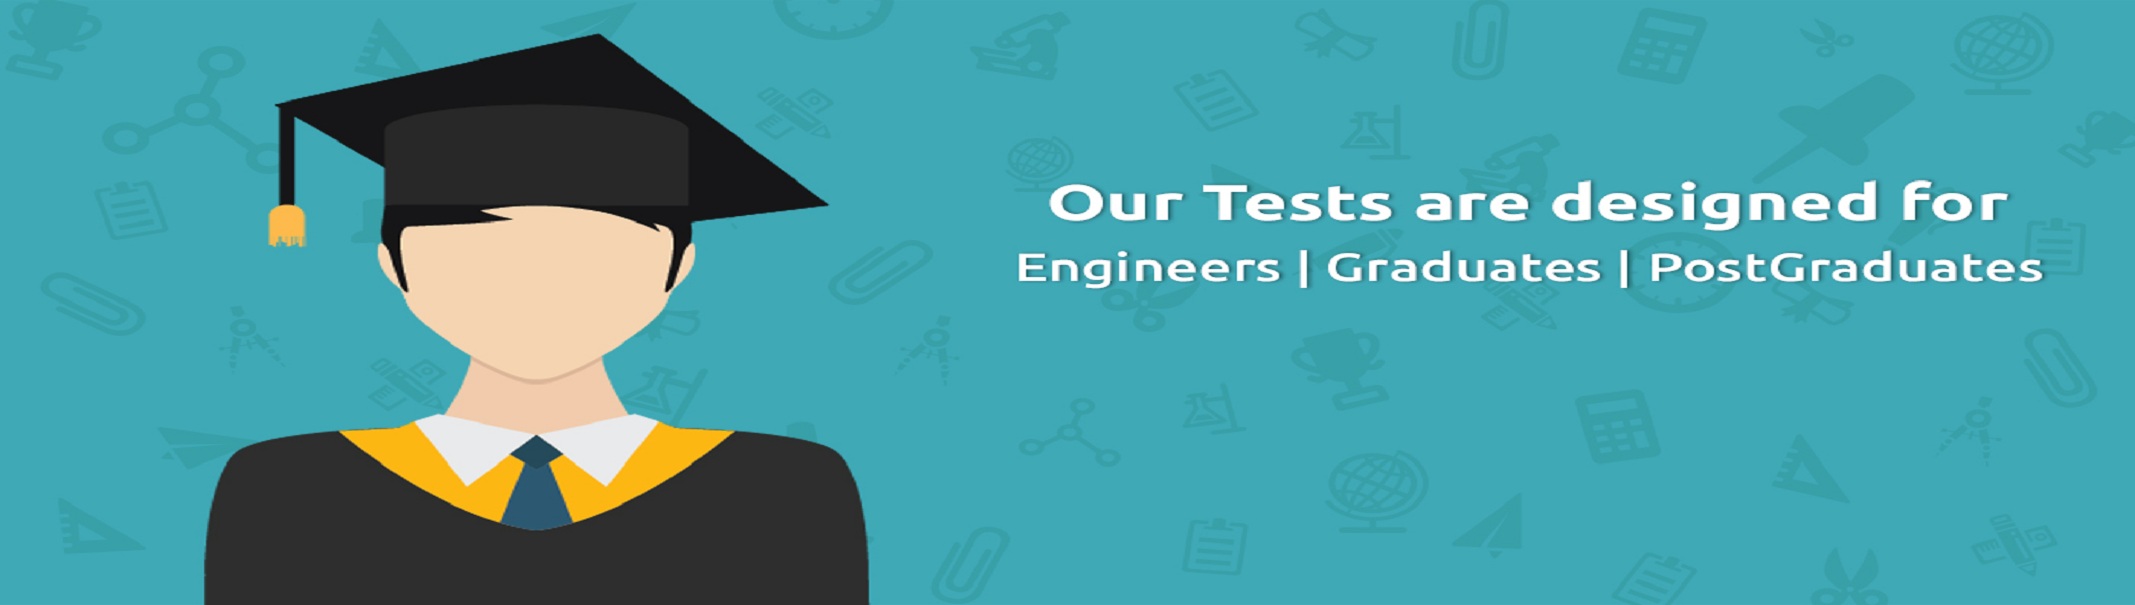 Our test is designed for